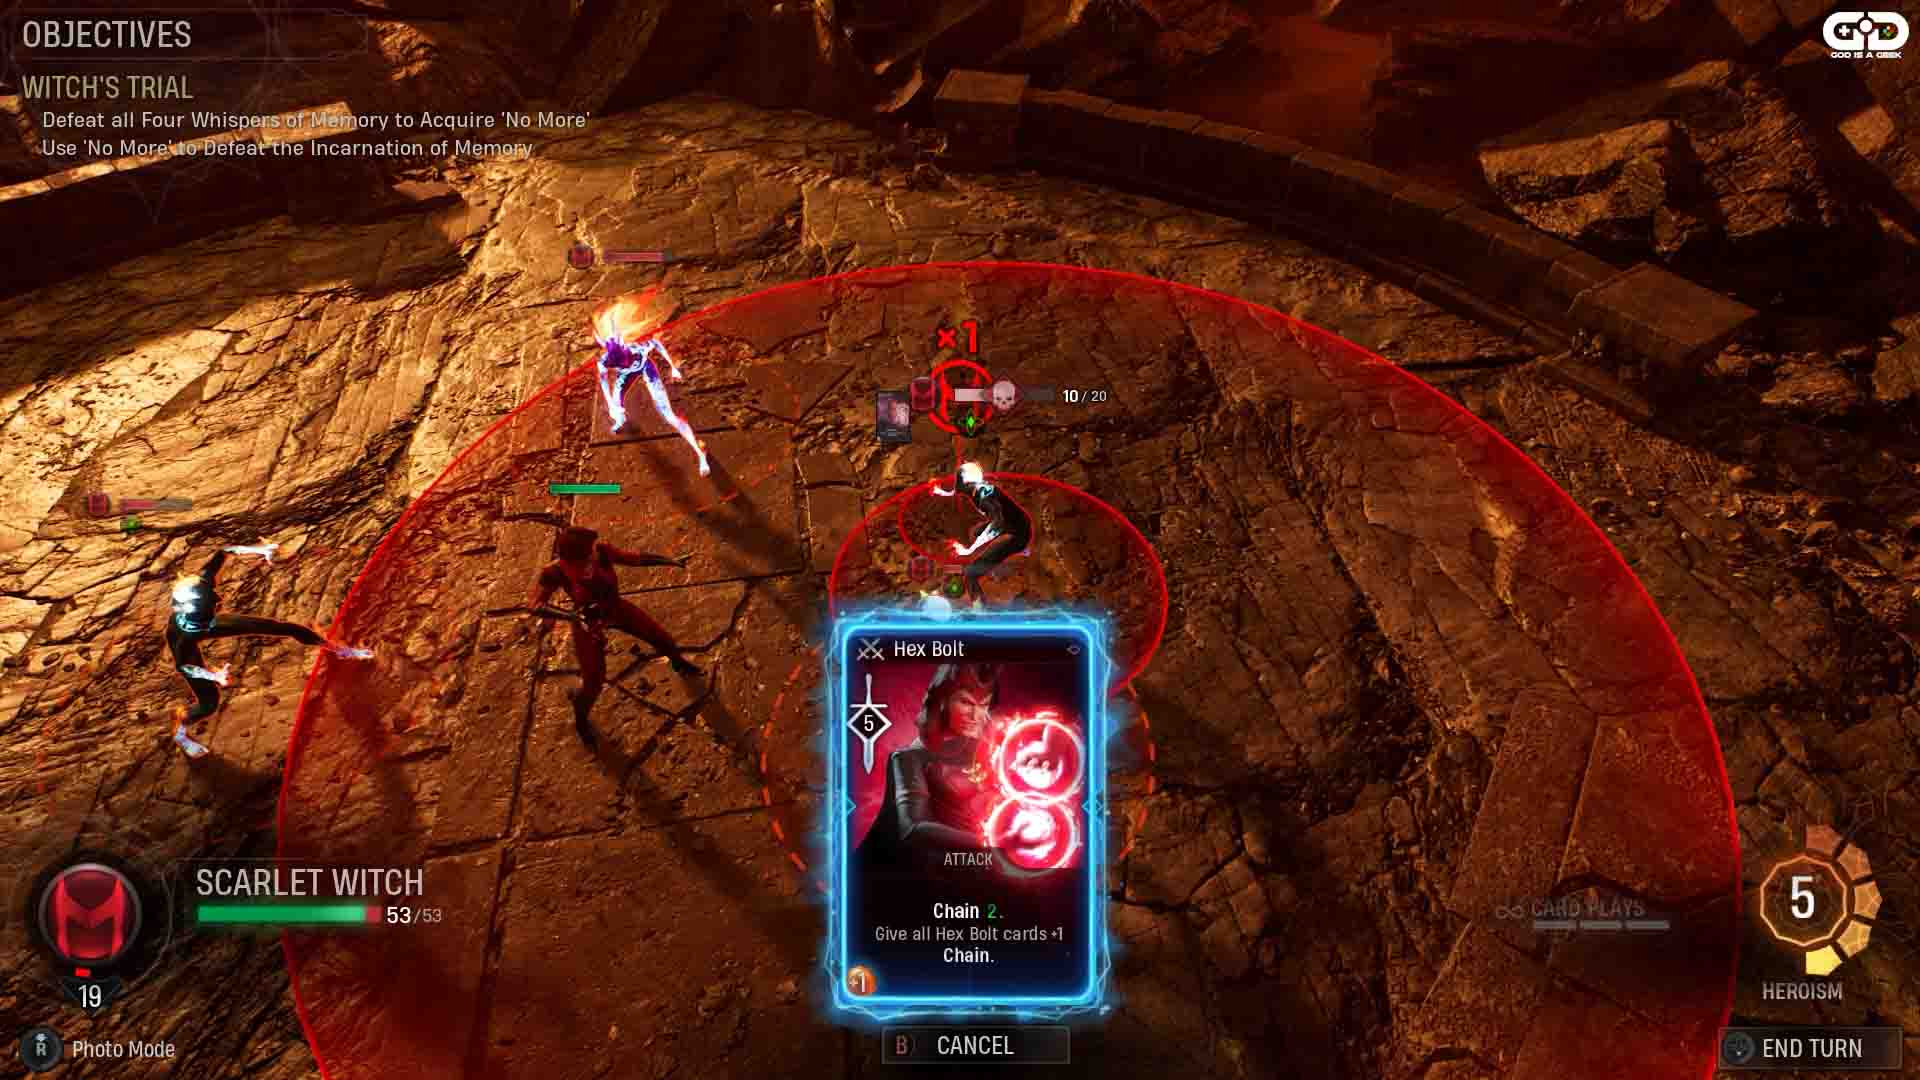 Midnight Suns Scarlet Witch Challenge Guide step 4